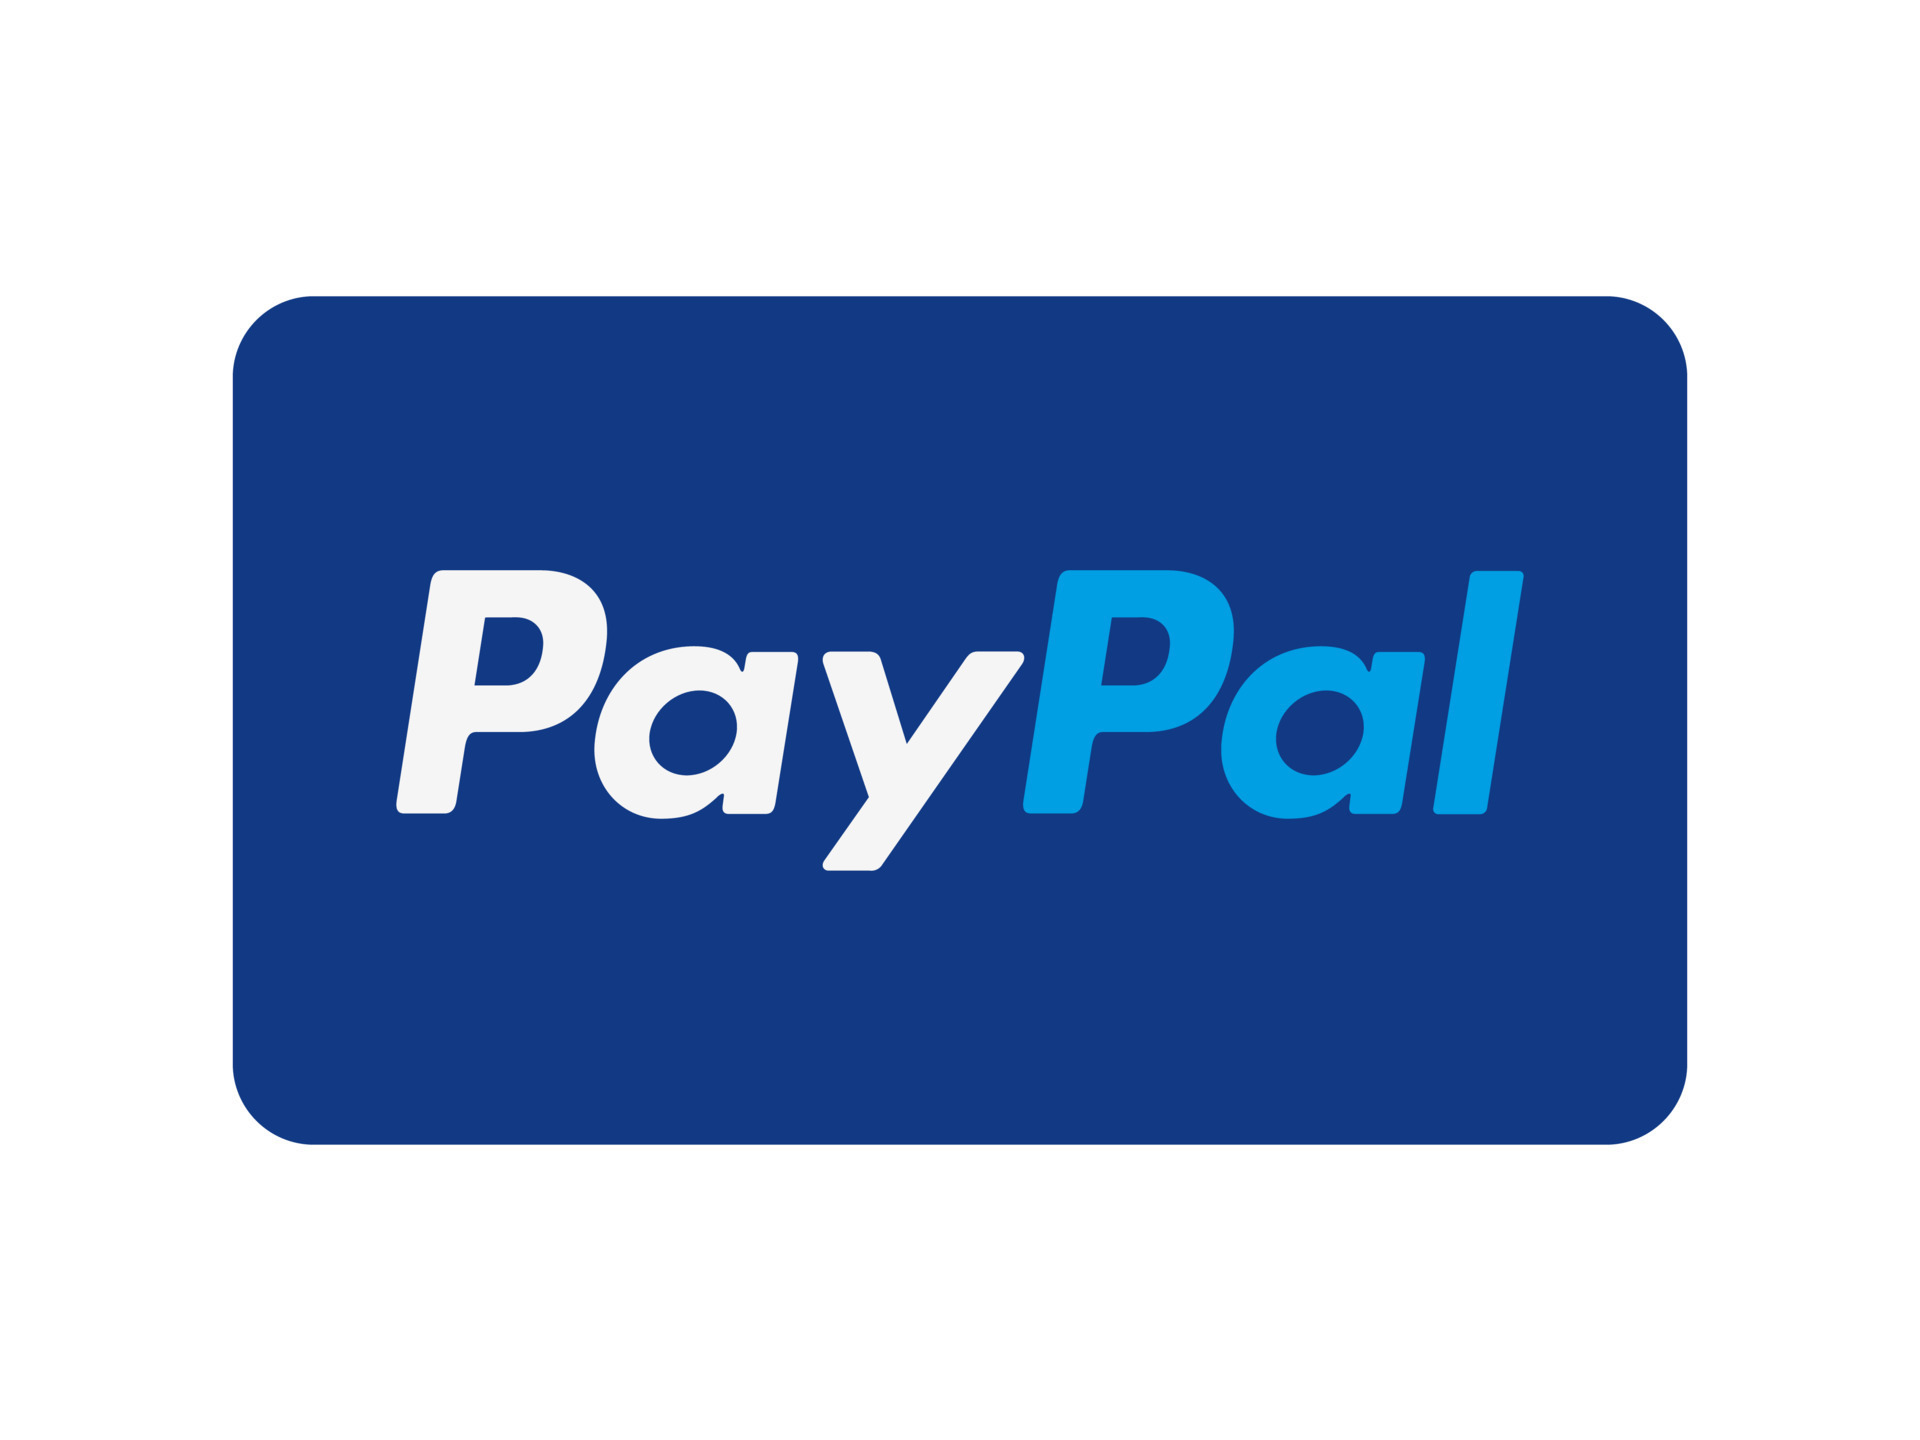 PayPal账号<span style='color:red;'>被</span><span style='color:red;'>关联</span>！跨境卖家<span style='color:red;'>如何</span><span style='color:red;'>自救</span>？<span style='color:red;'>关于</span>PayPal防<span style='color:red;'>关联</span>你<span style='color:red;'>不</span>得<span style='color:red;'>不</span>知道<span style='color:red;'>的</span>事！